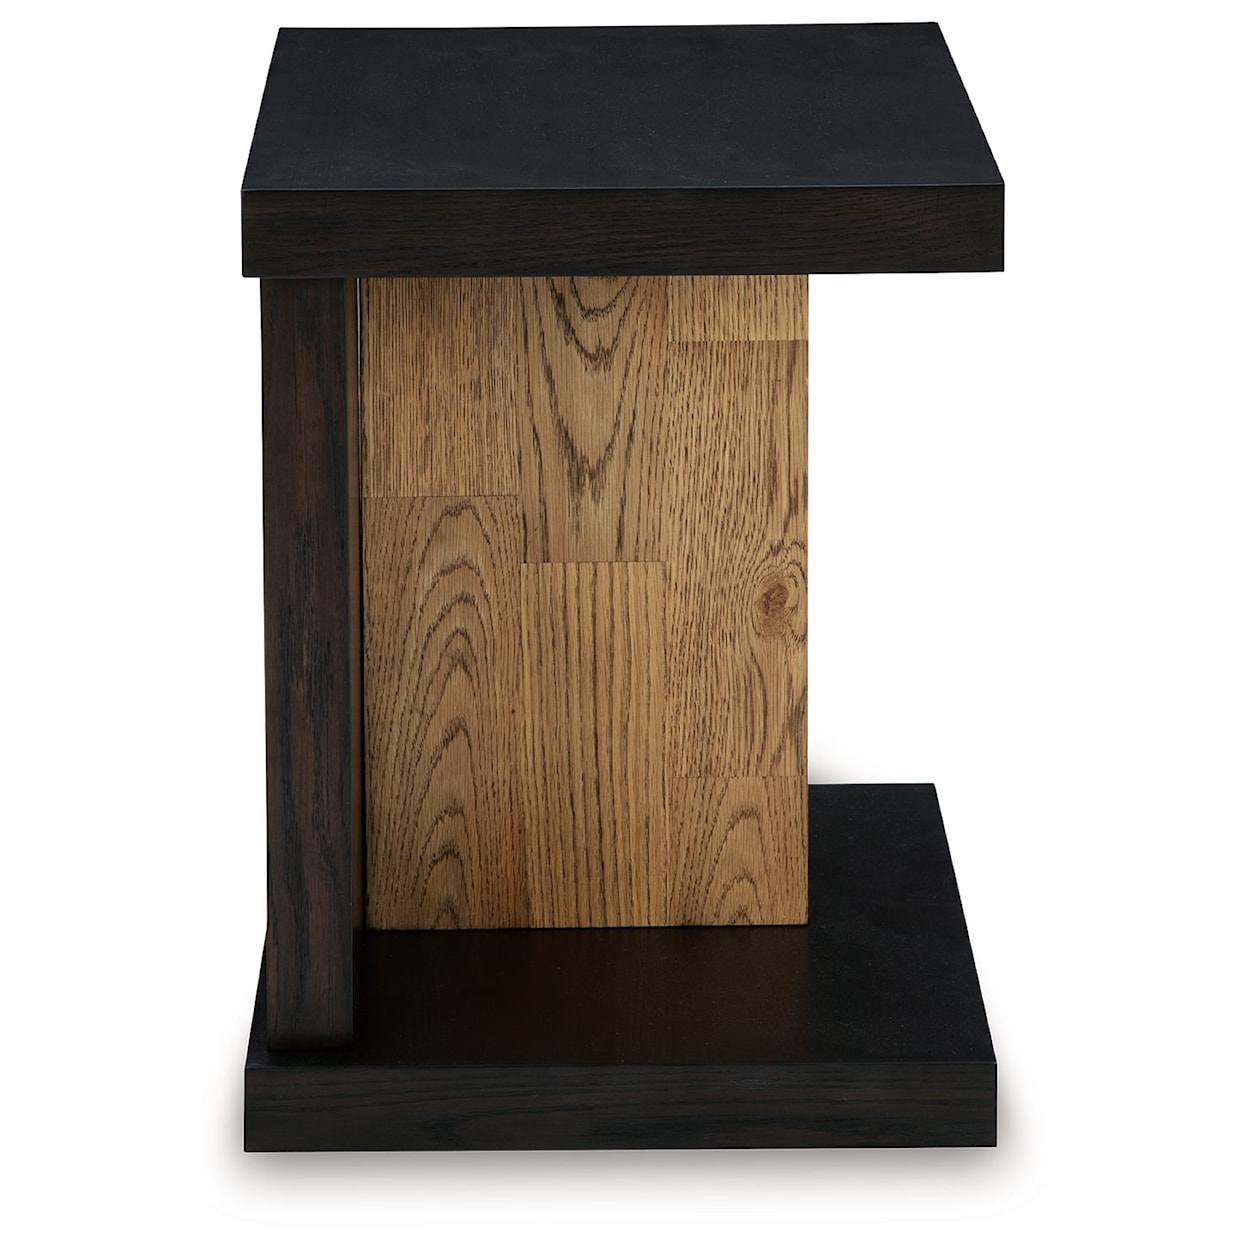 Signature Design Kocomore Chairside End Table